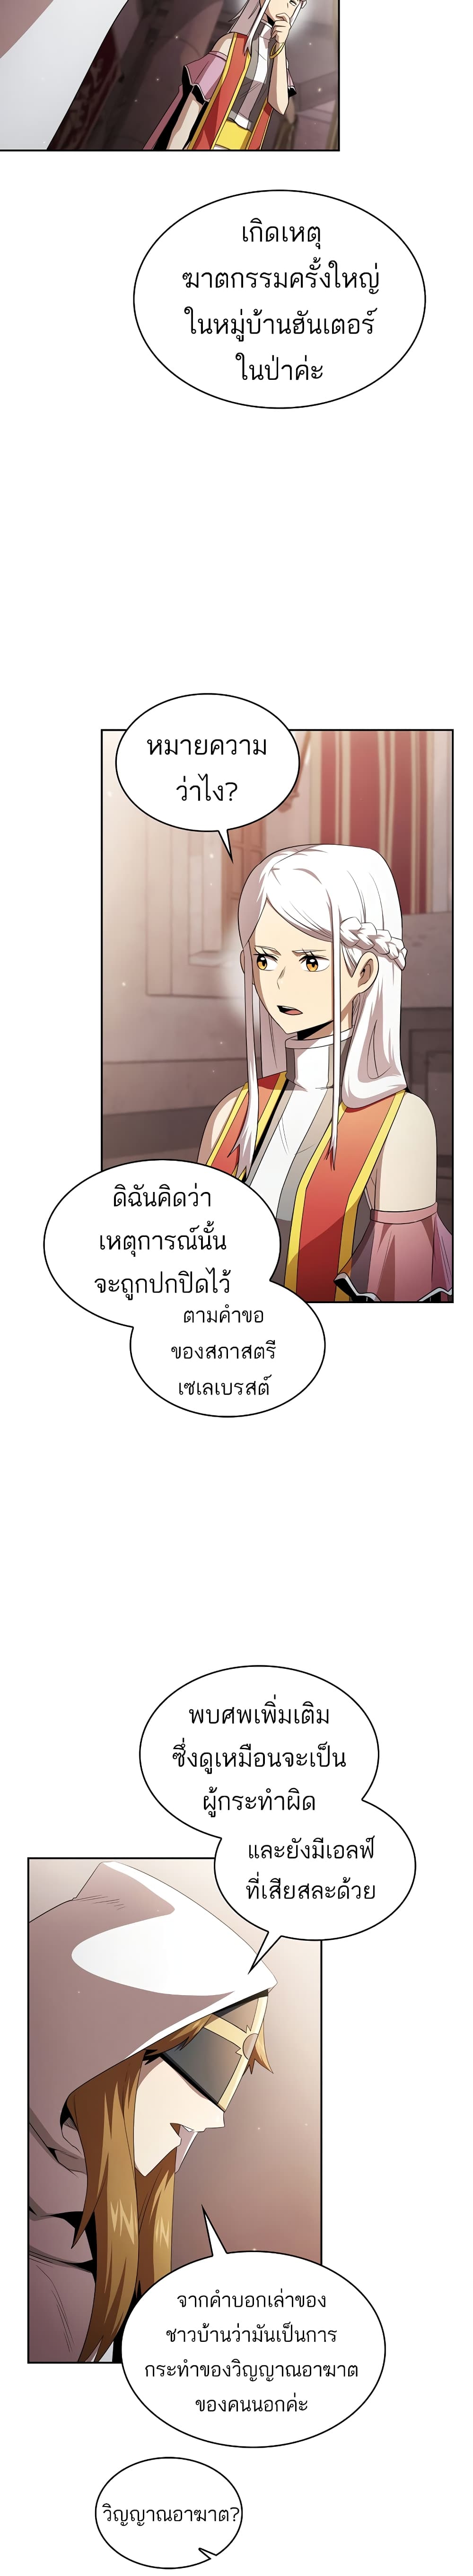 Is This Hero for Real à¸à¸­à¸à¸à¸µà¹ 33 (9)